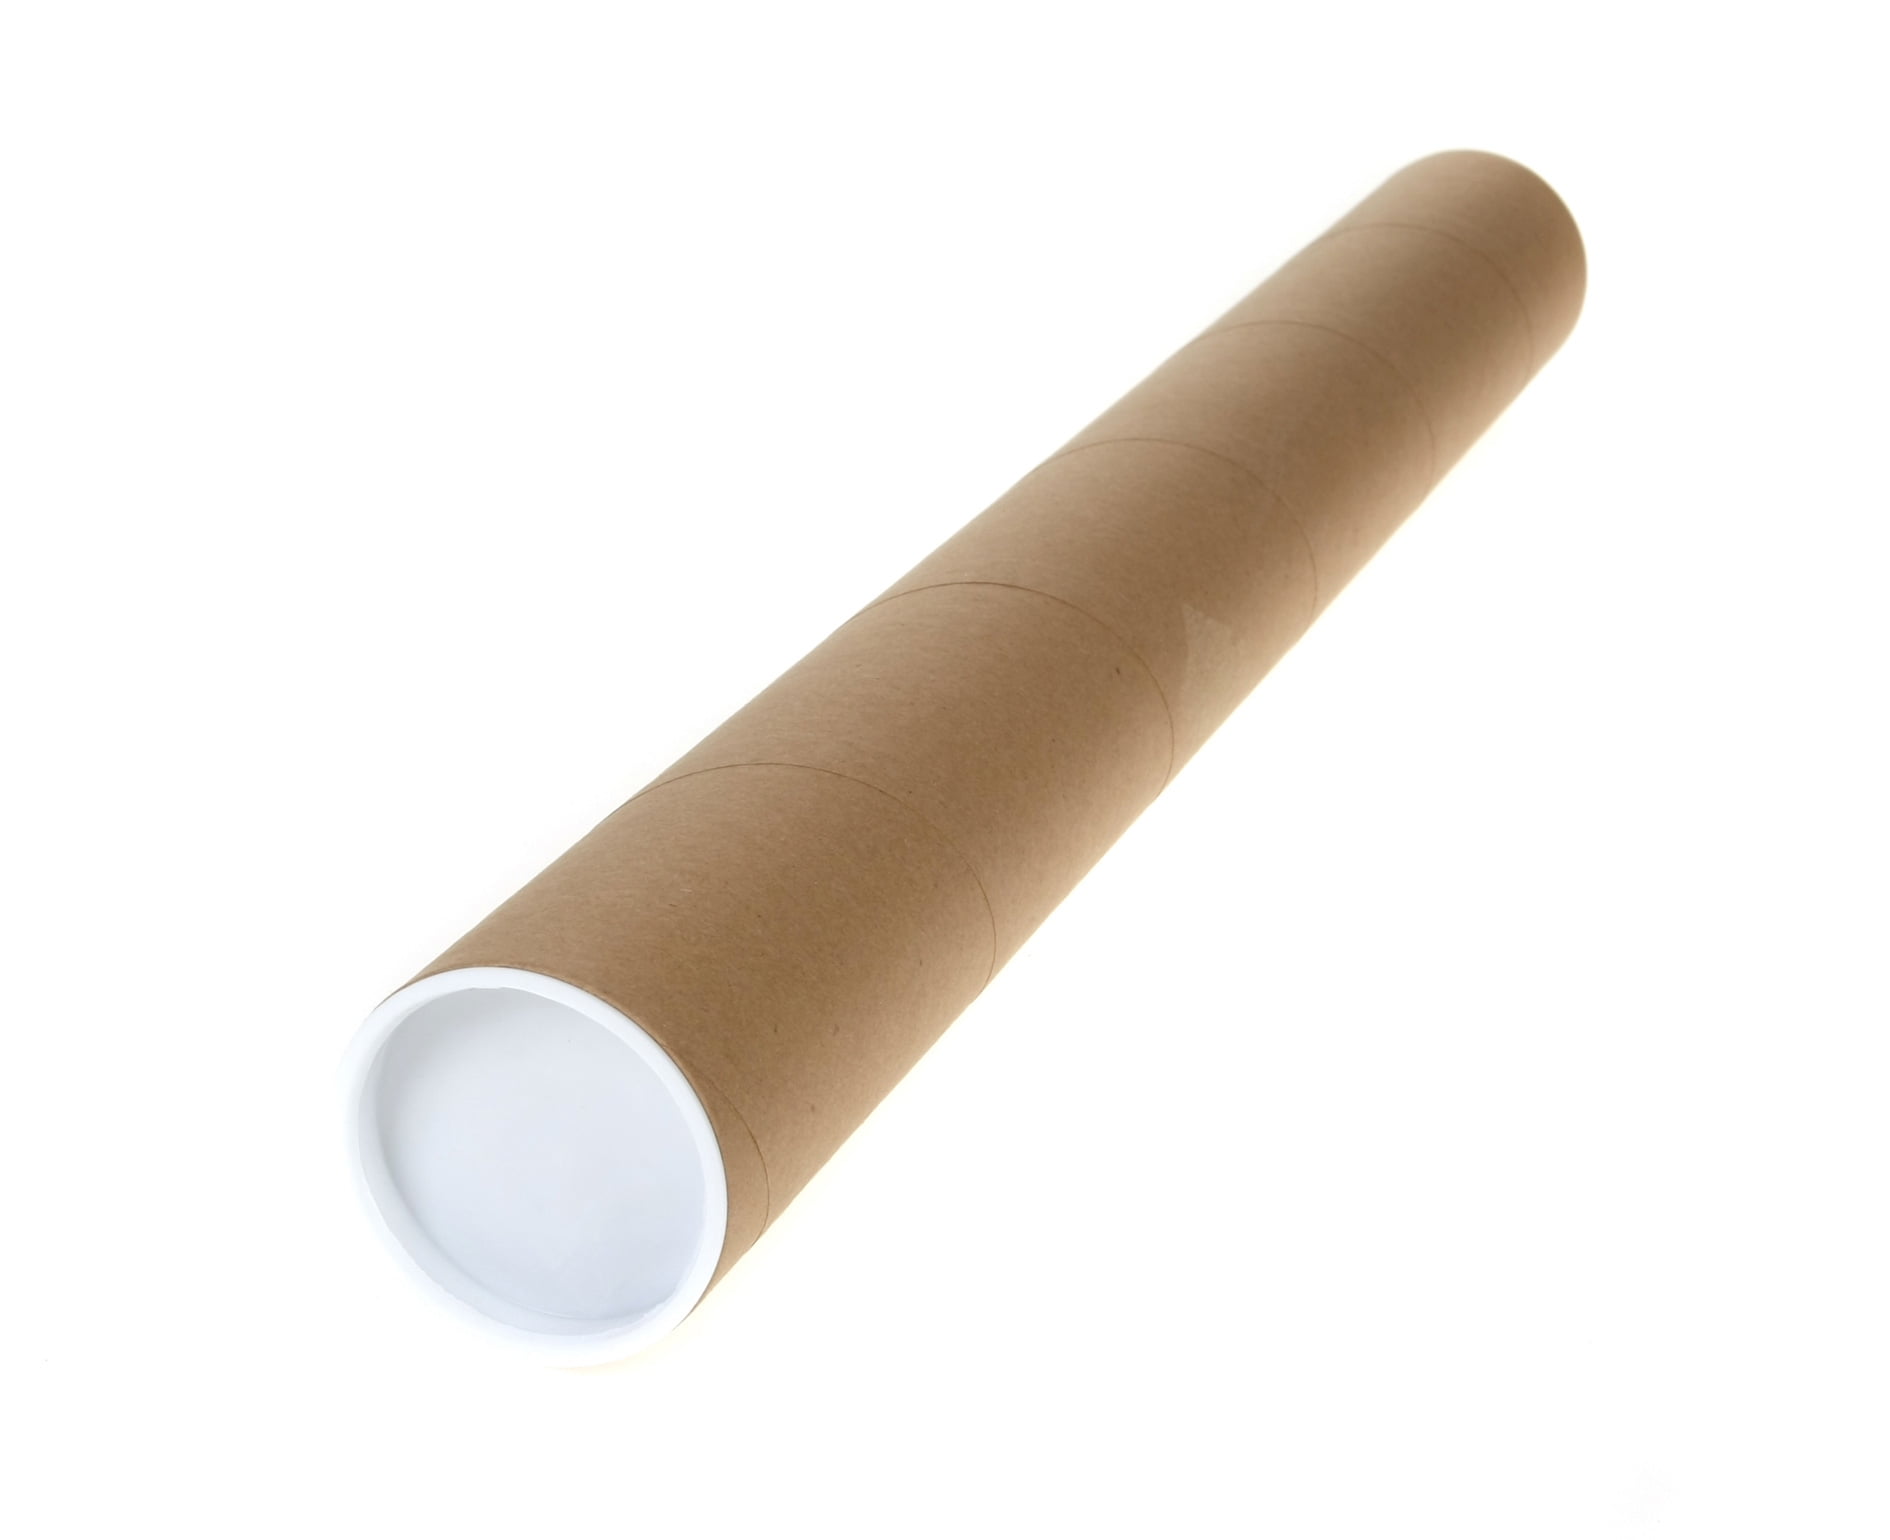 TubeeQueen Mailing Tubes with Caps, 4 inch X 36 inch usable length (2 Piece  Pack)